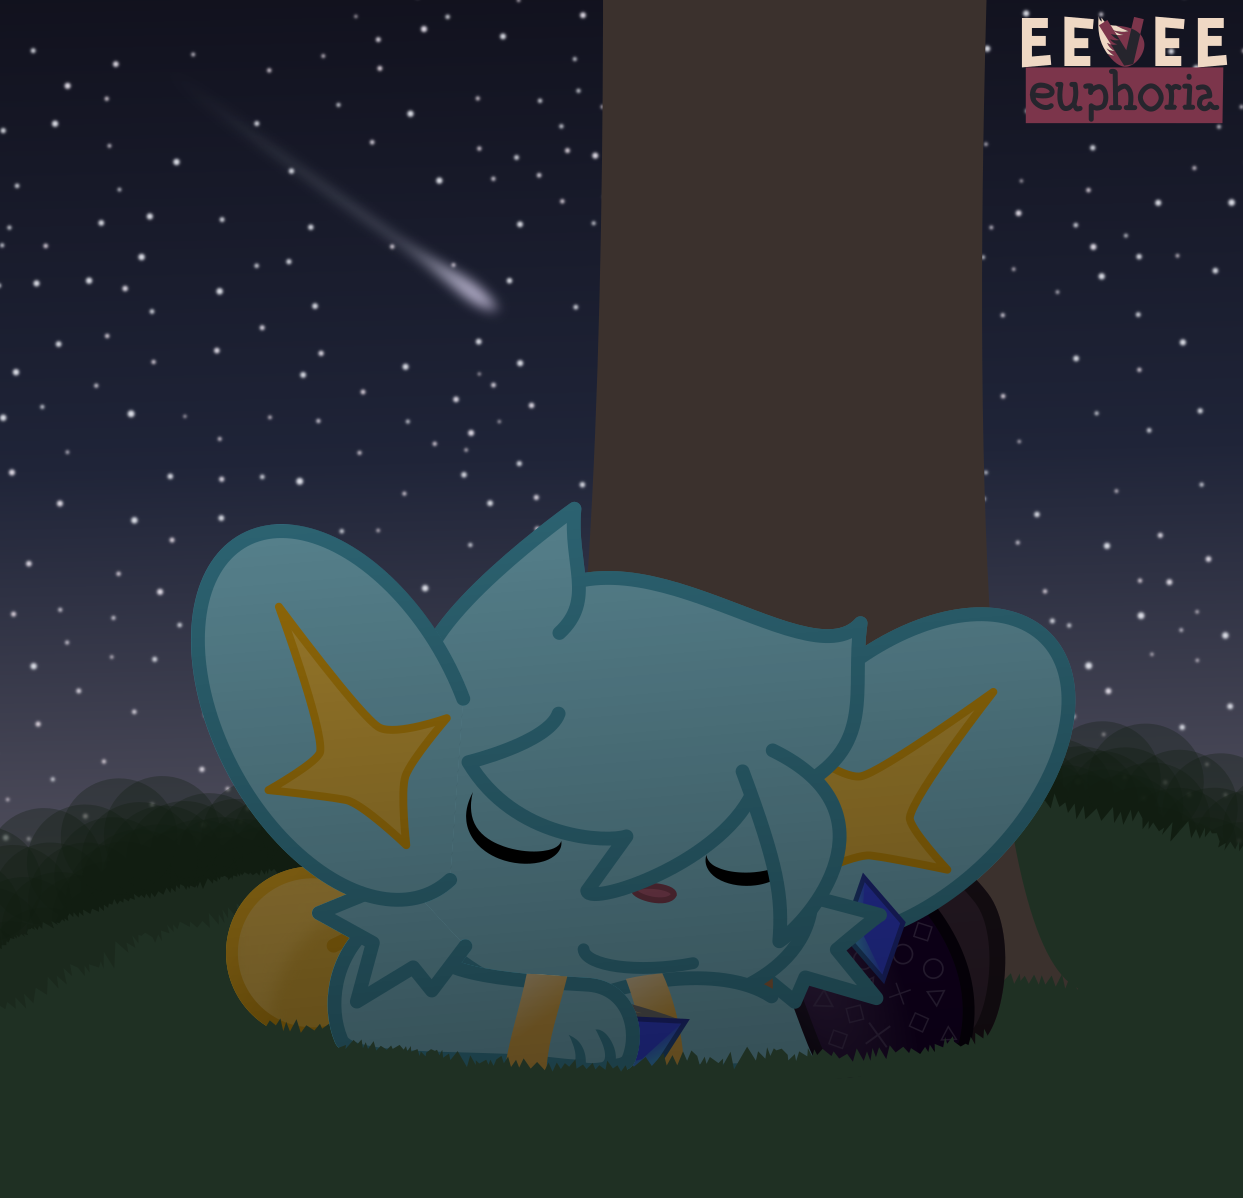 A shinx is sleeping peacefully under a tree during the night. A shooting star is seen in the background.